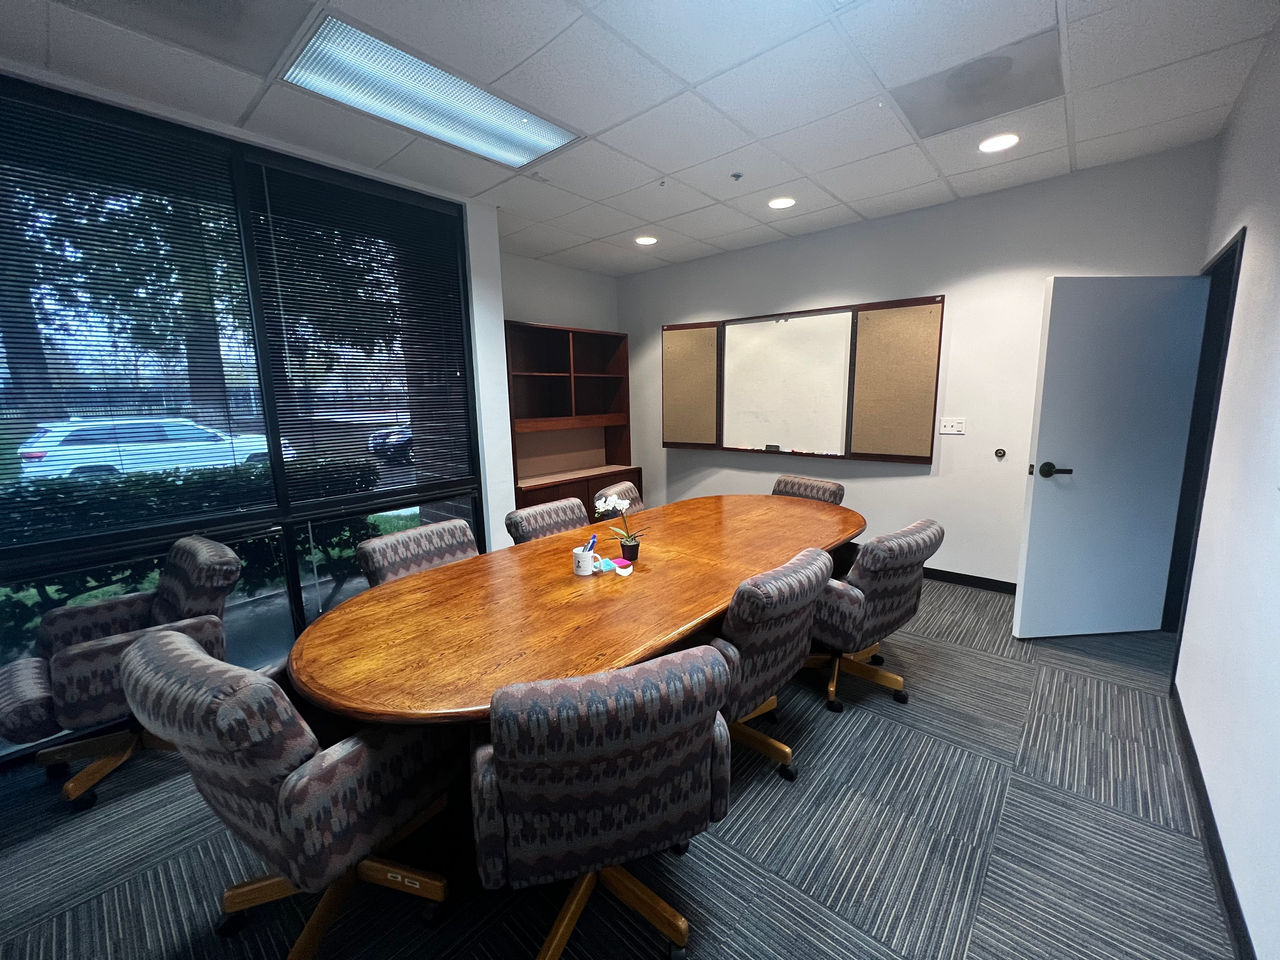 Meeting room with large table and chairs, Shasta conference room